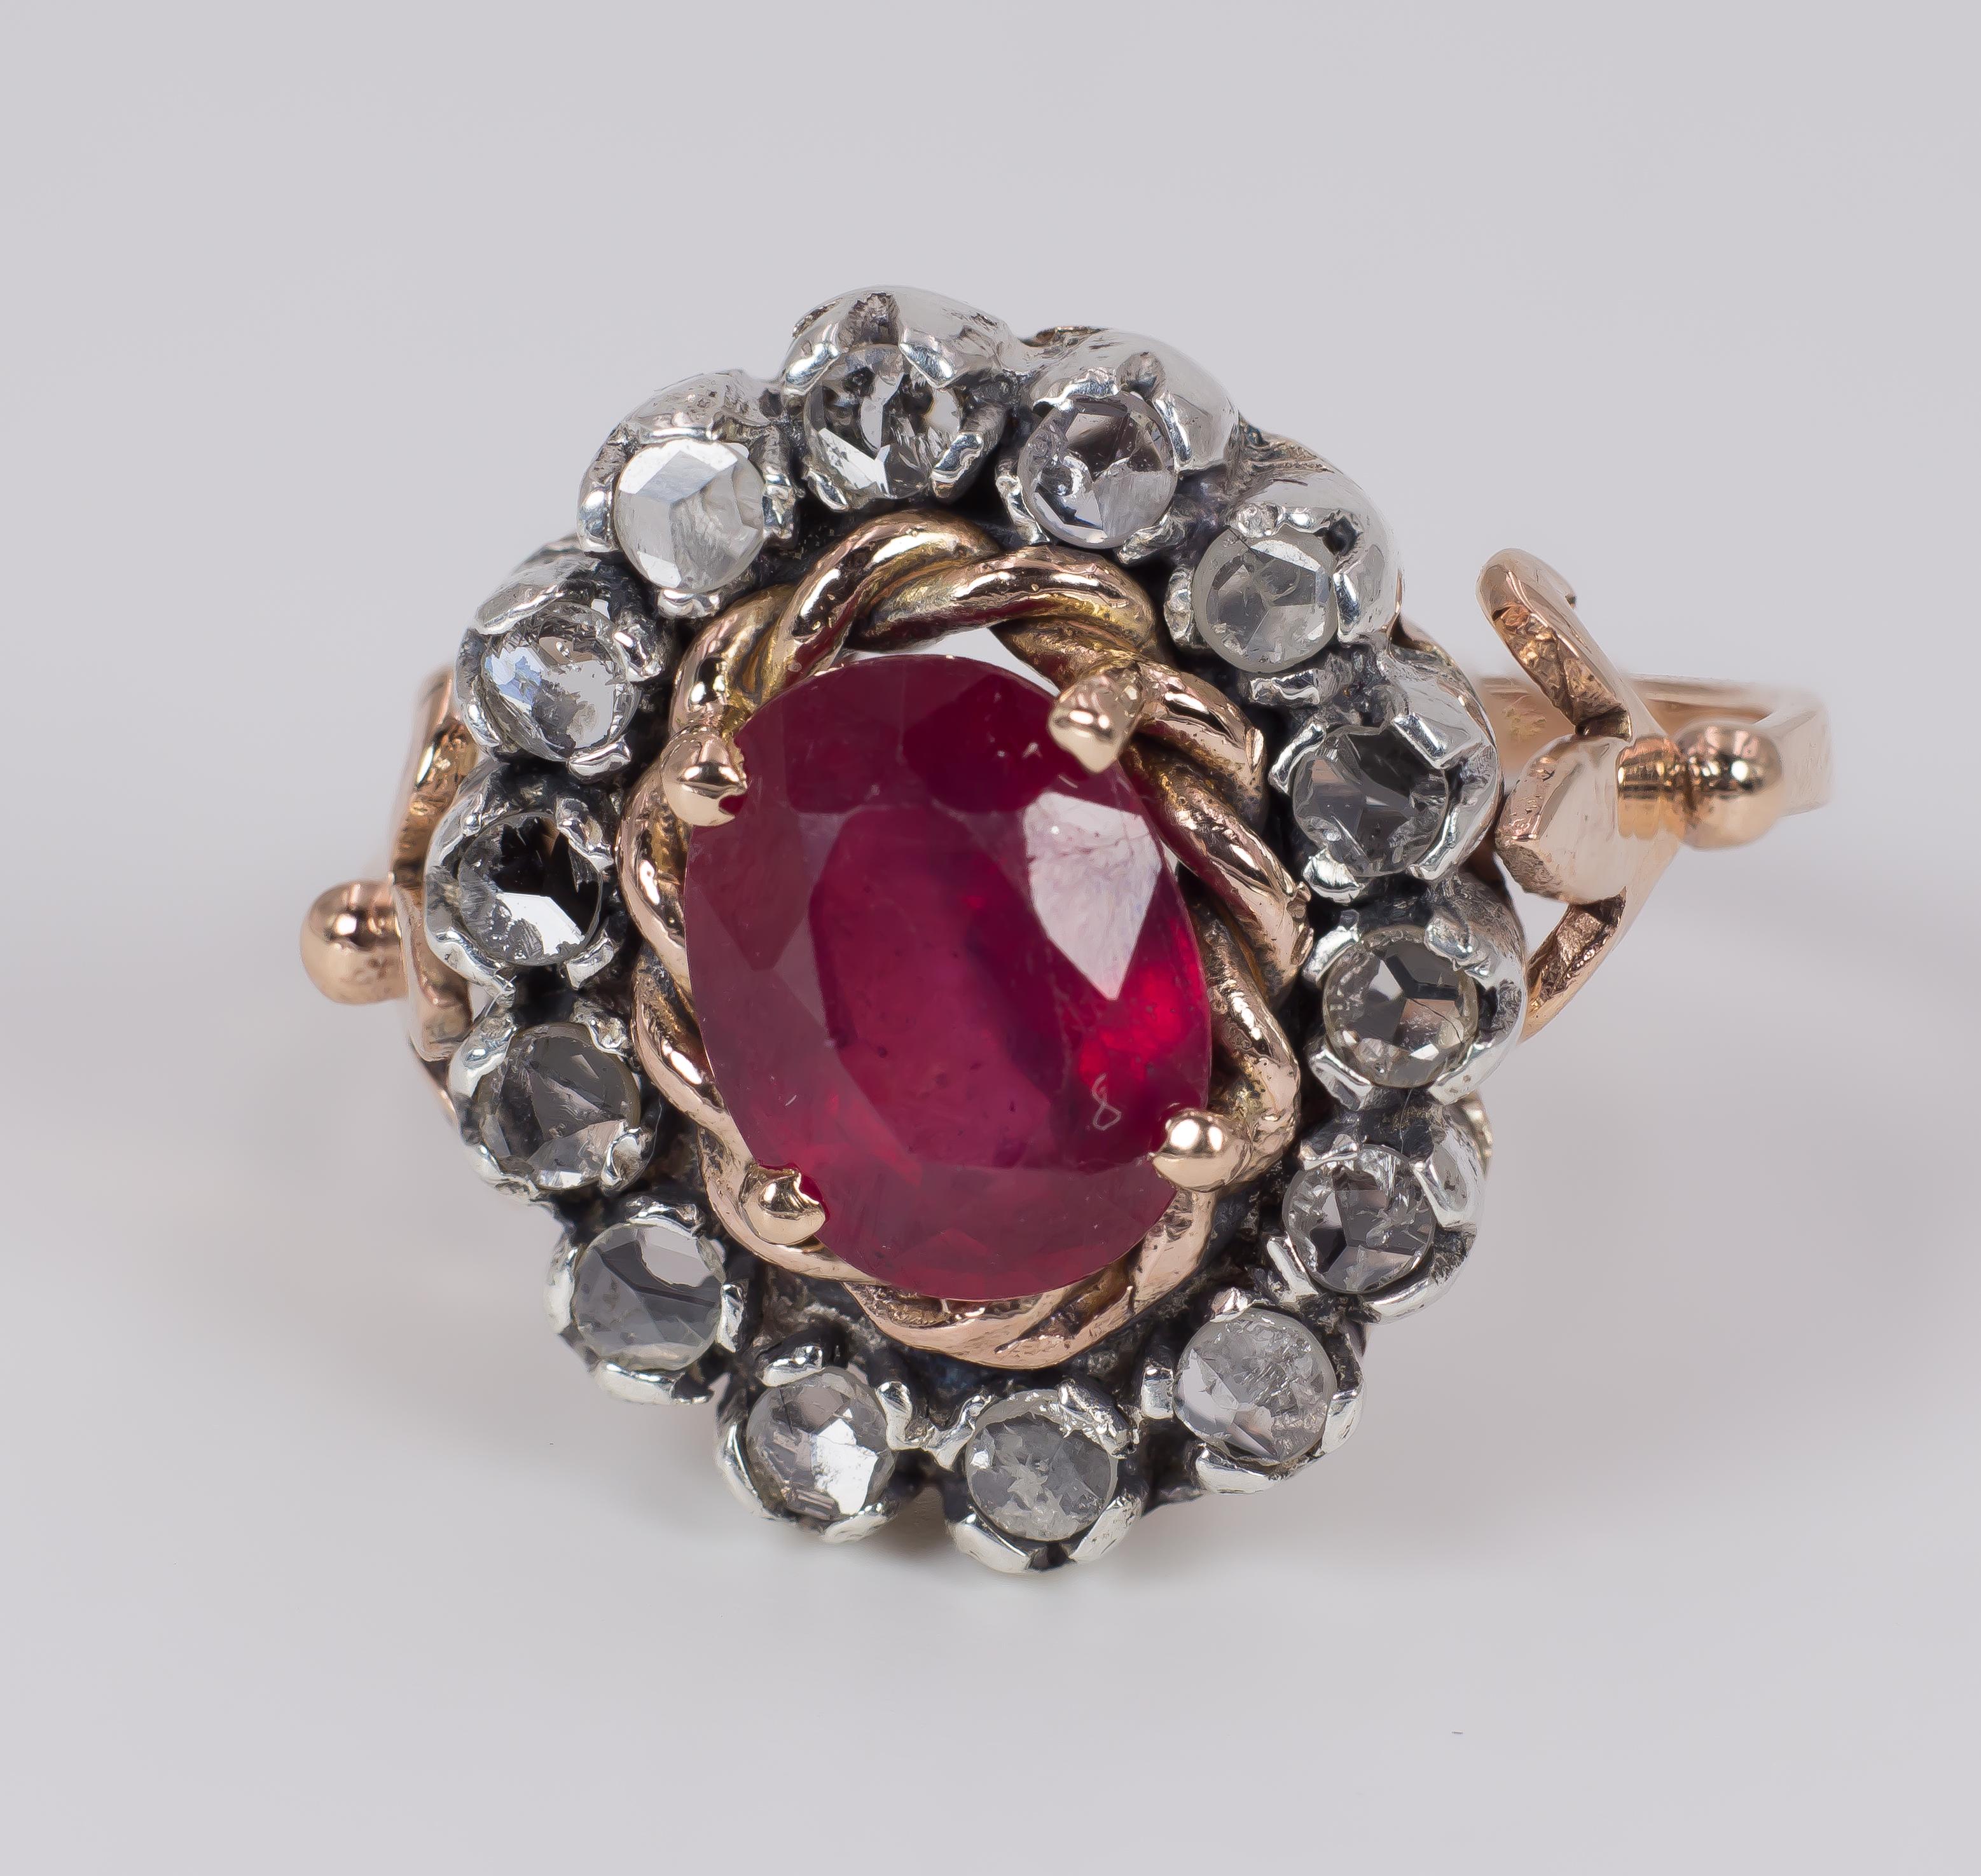 An antique gold, ruby and diamond ring, dating from the 1940s.
Modelled in 9K gold throughout, it has a superb main stone, a 2ct red ruby, surrounded by a crown of beautiful rose cut diamonds.
The entire ring is held up by a shank that end in an